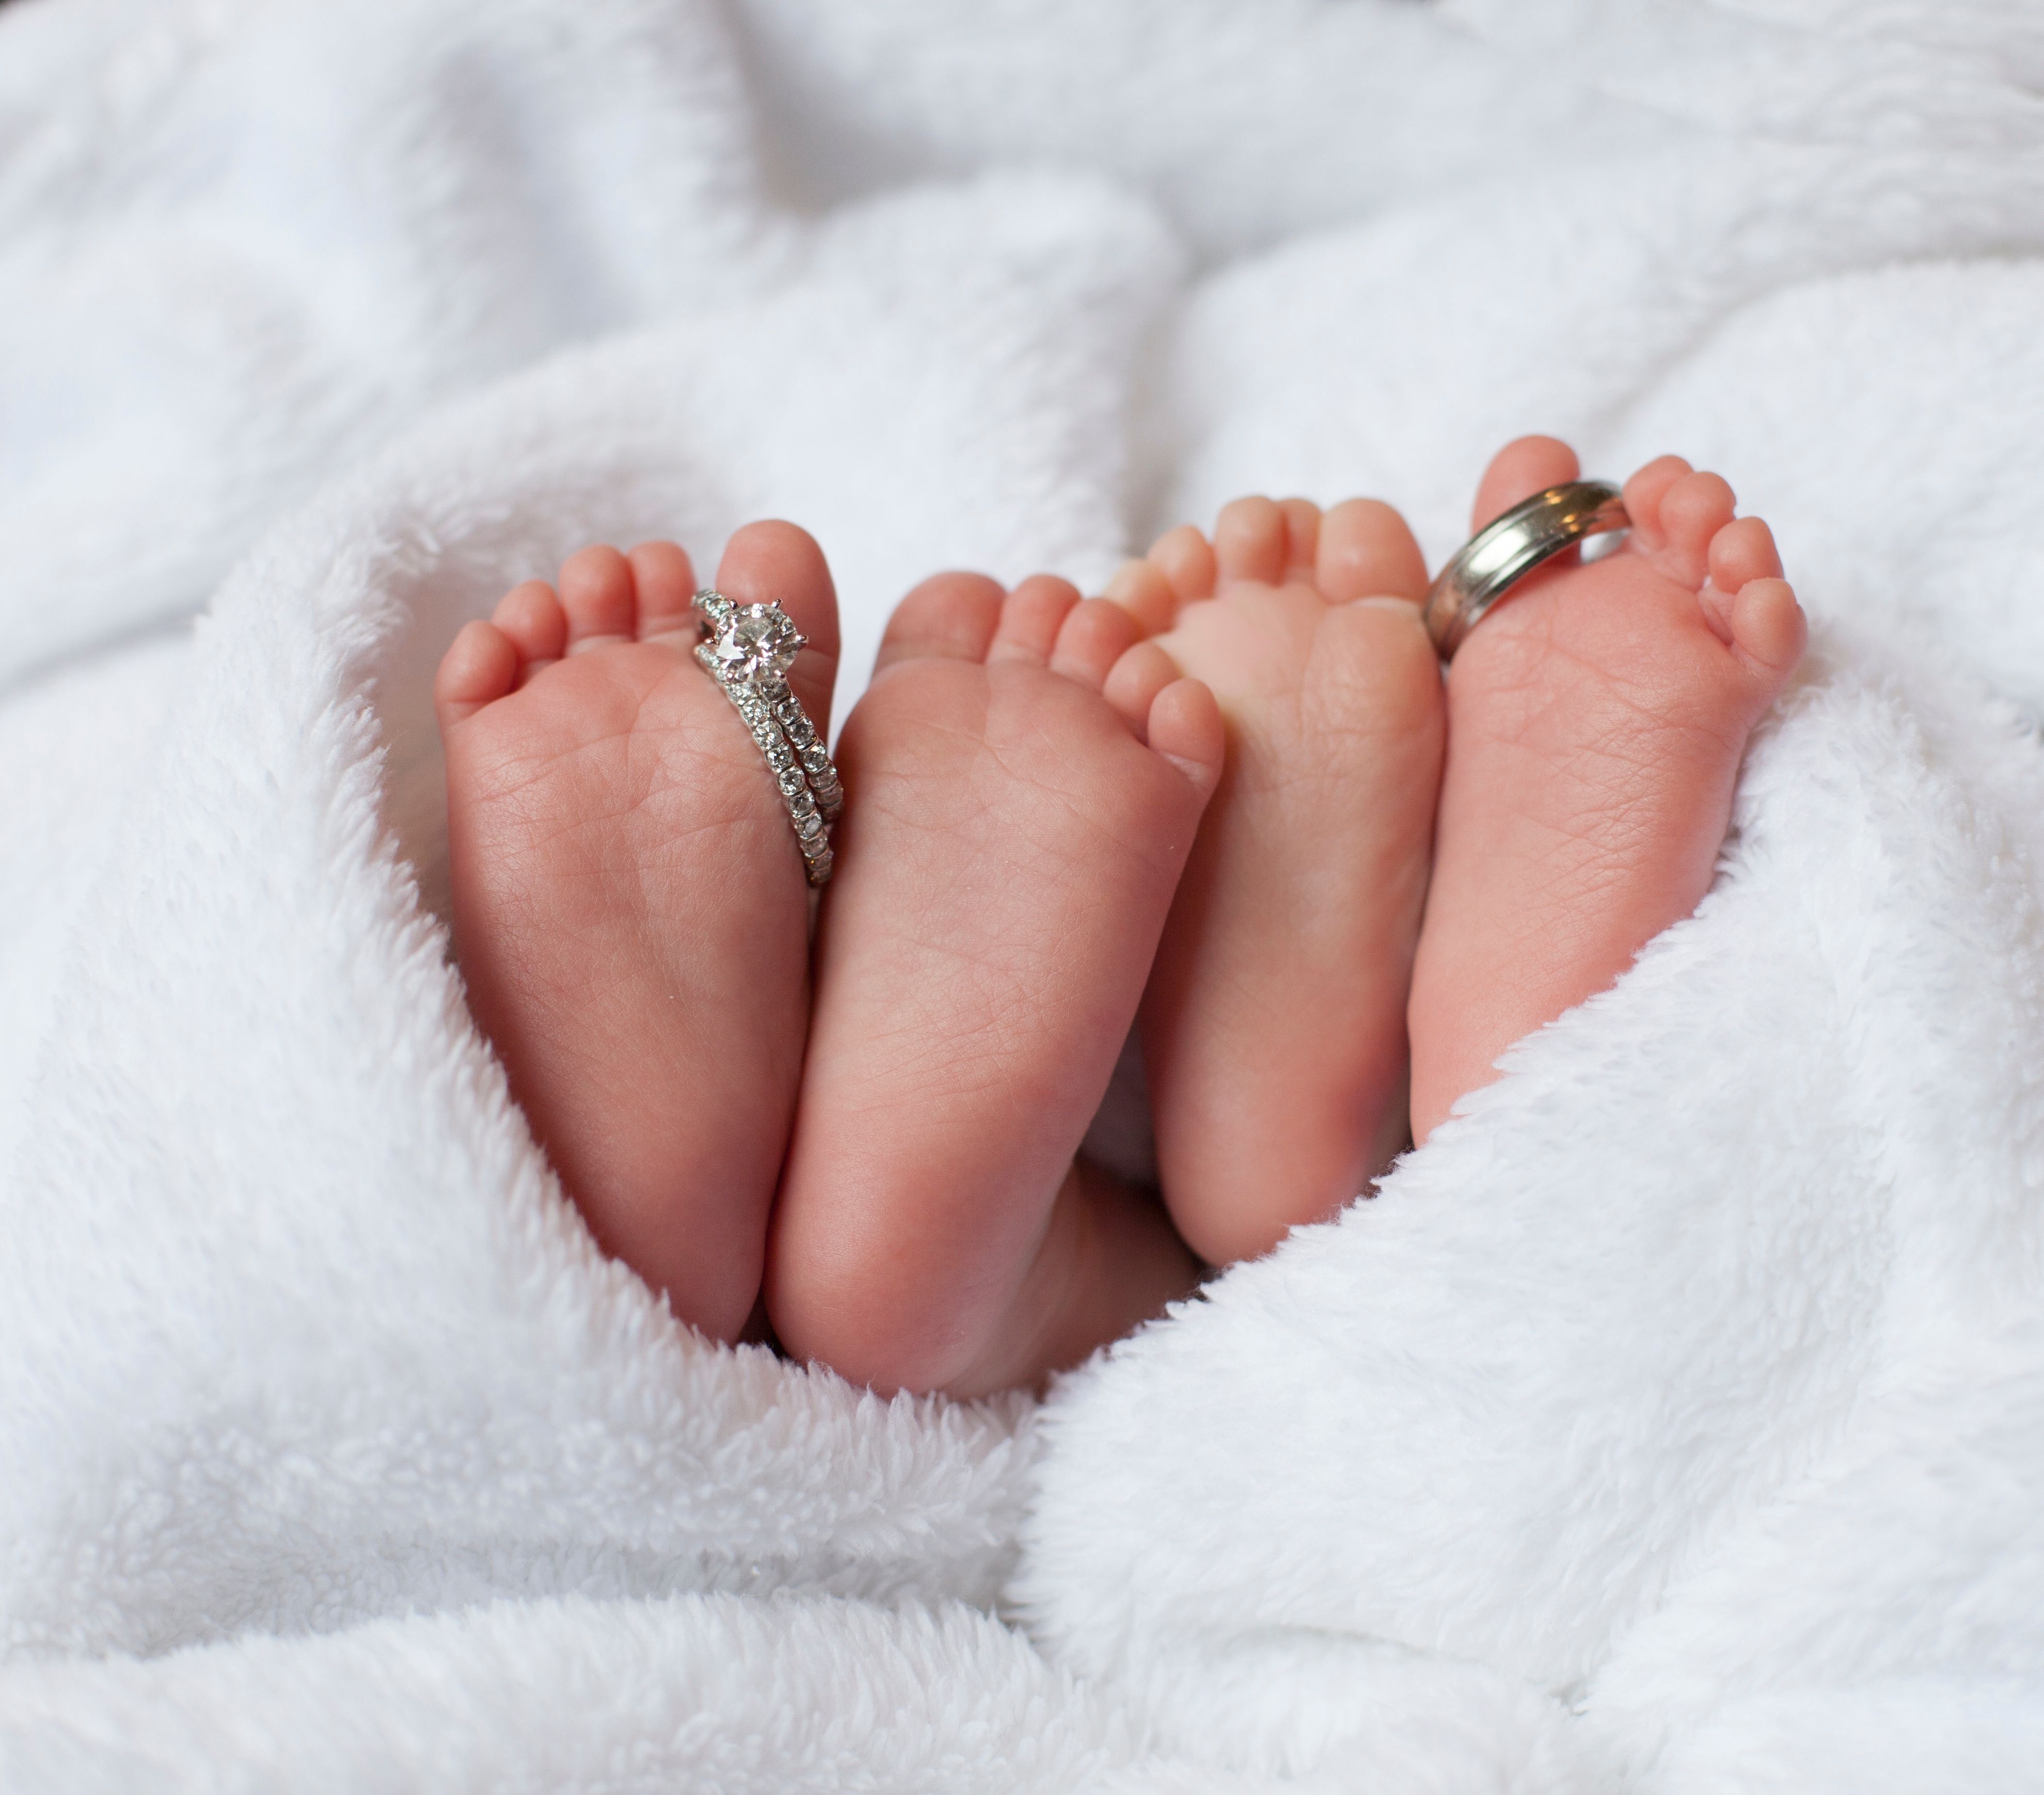 Twin Baby Girls Feet With Wedding Rings Willow Baby Photography Throughout Current Adelaide Toe Rings (View 13 of 15)